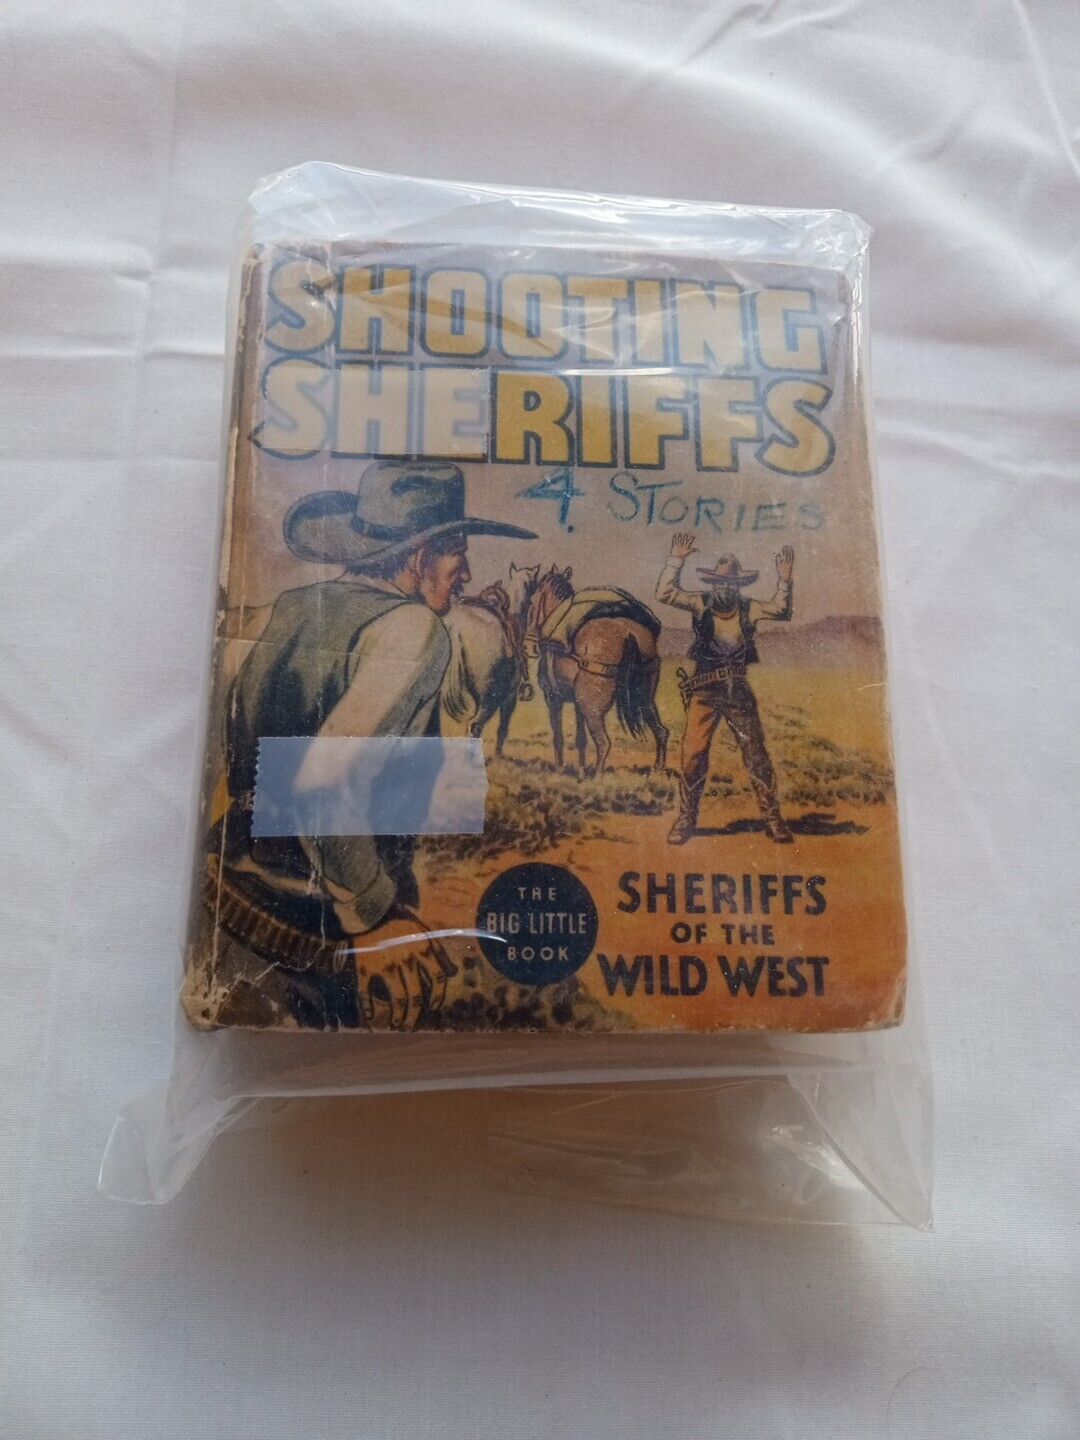 SHOOTING SHERIFFS OF THE WILD WEST 1936 BIG LITTLE BOOK 